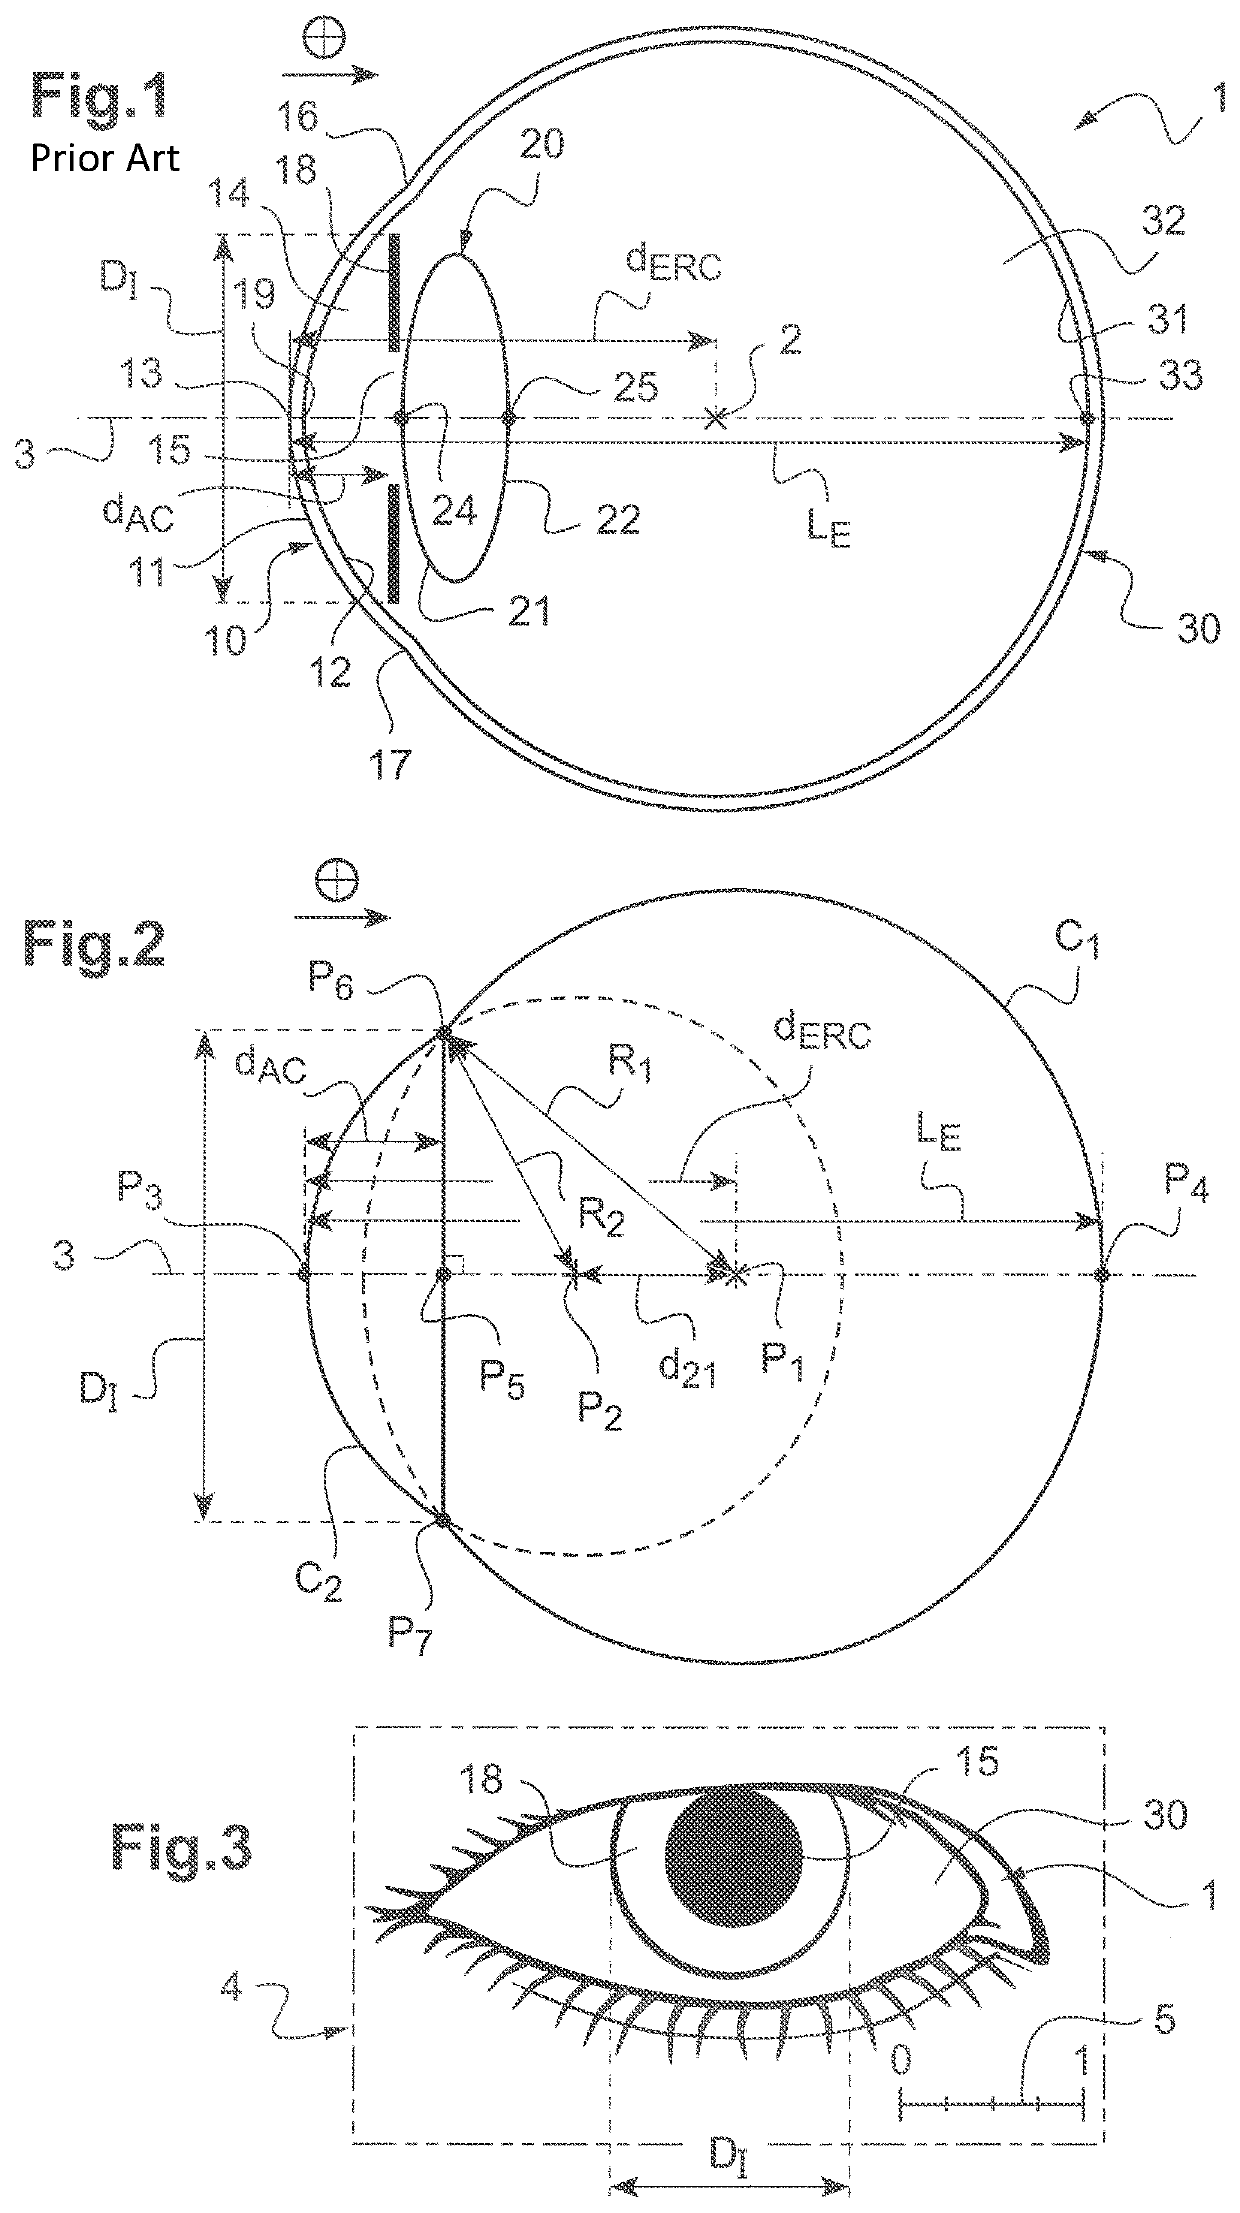 Method for determining the position of the eye rotation center of the eye of a subject, and associated device